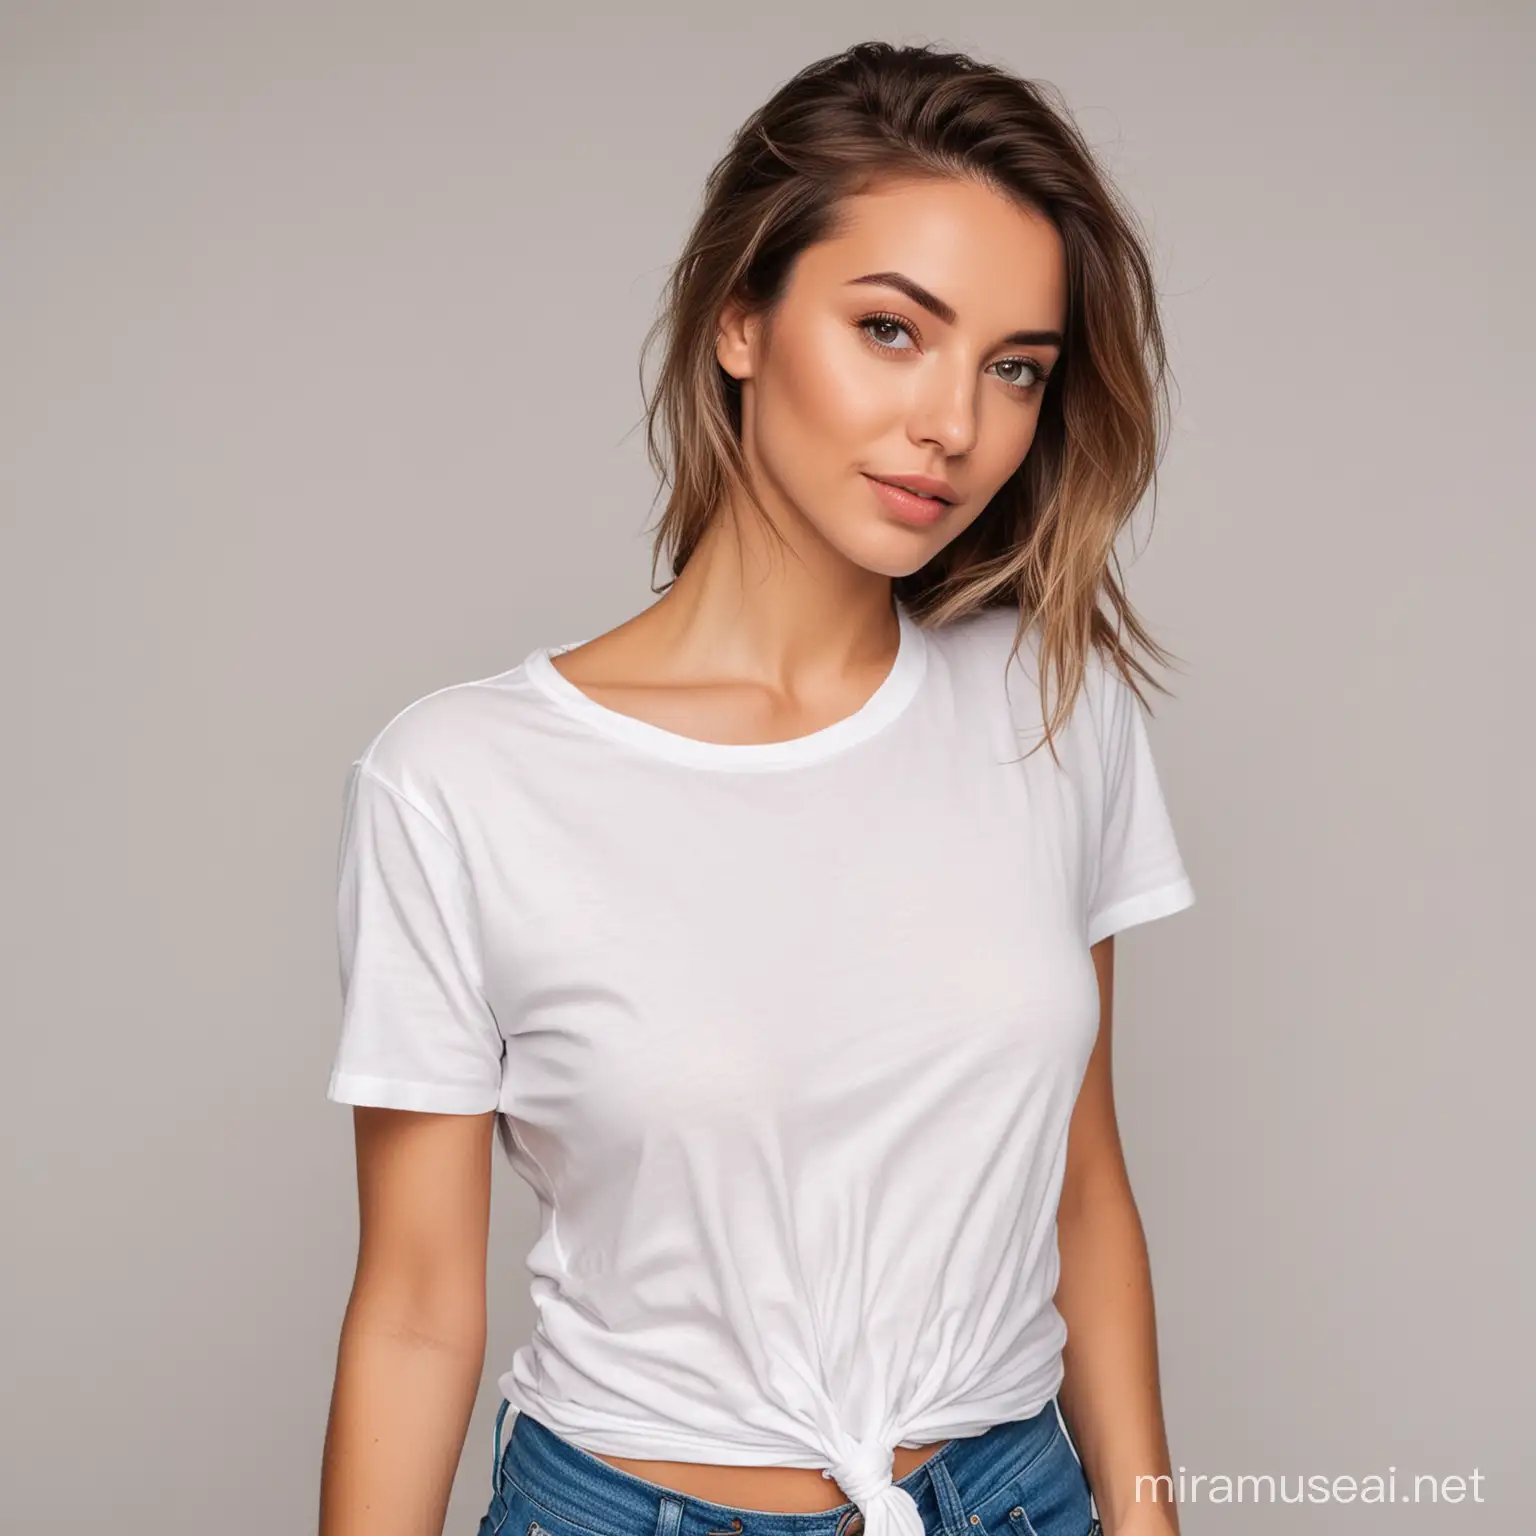 Stylish Woman in Casual White Tee